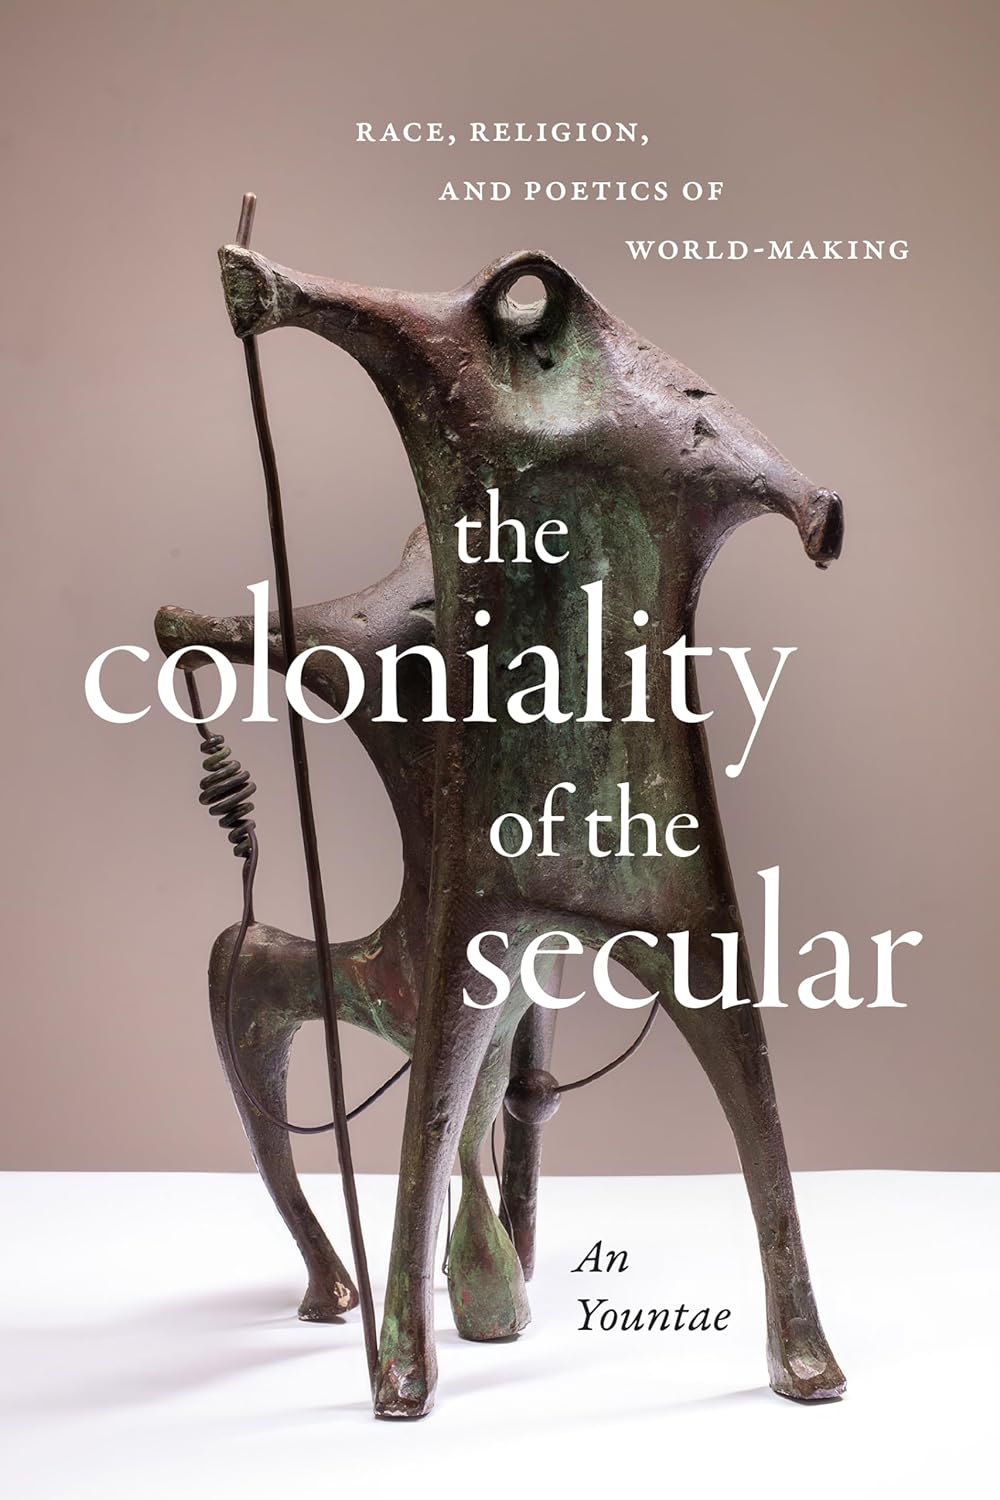 The Coloniality of the Secular: Race, Religion, and Poetics of World-Making by Yountae An